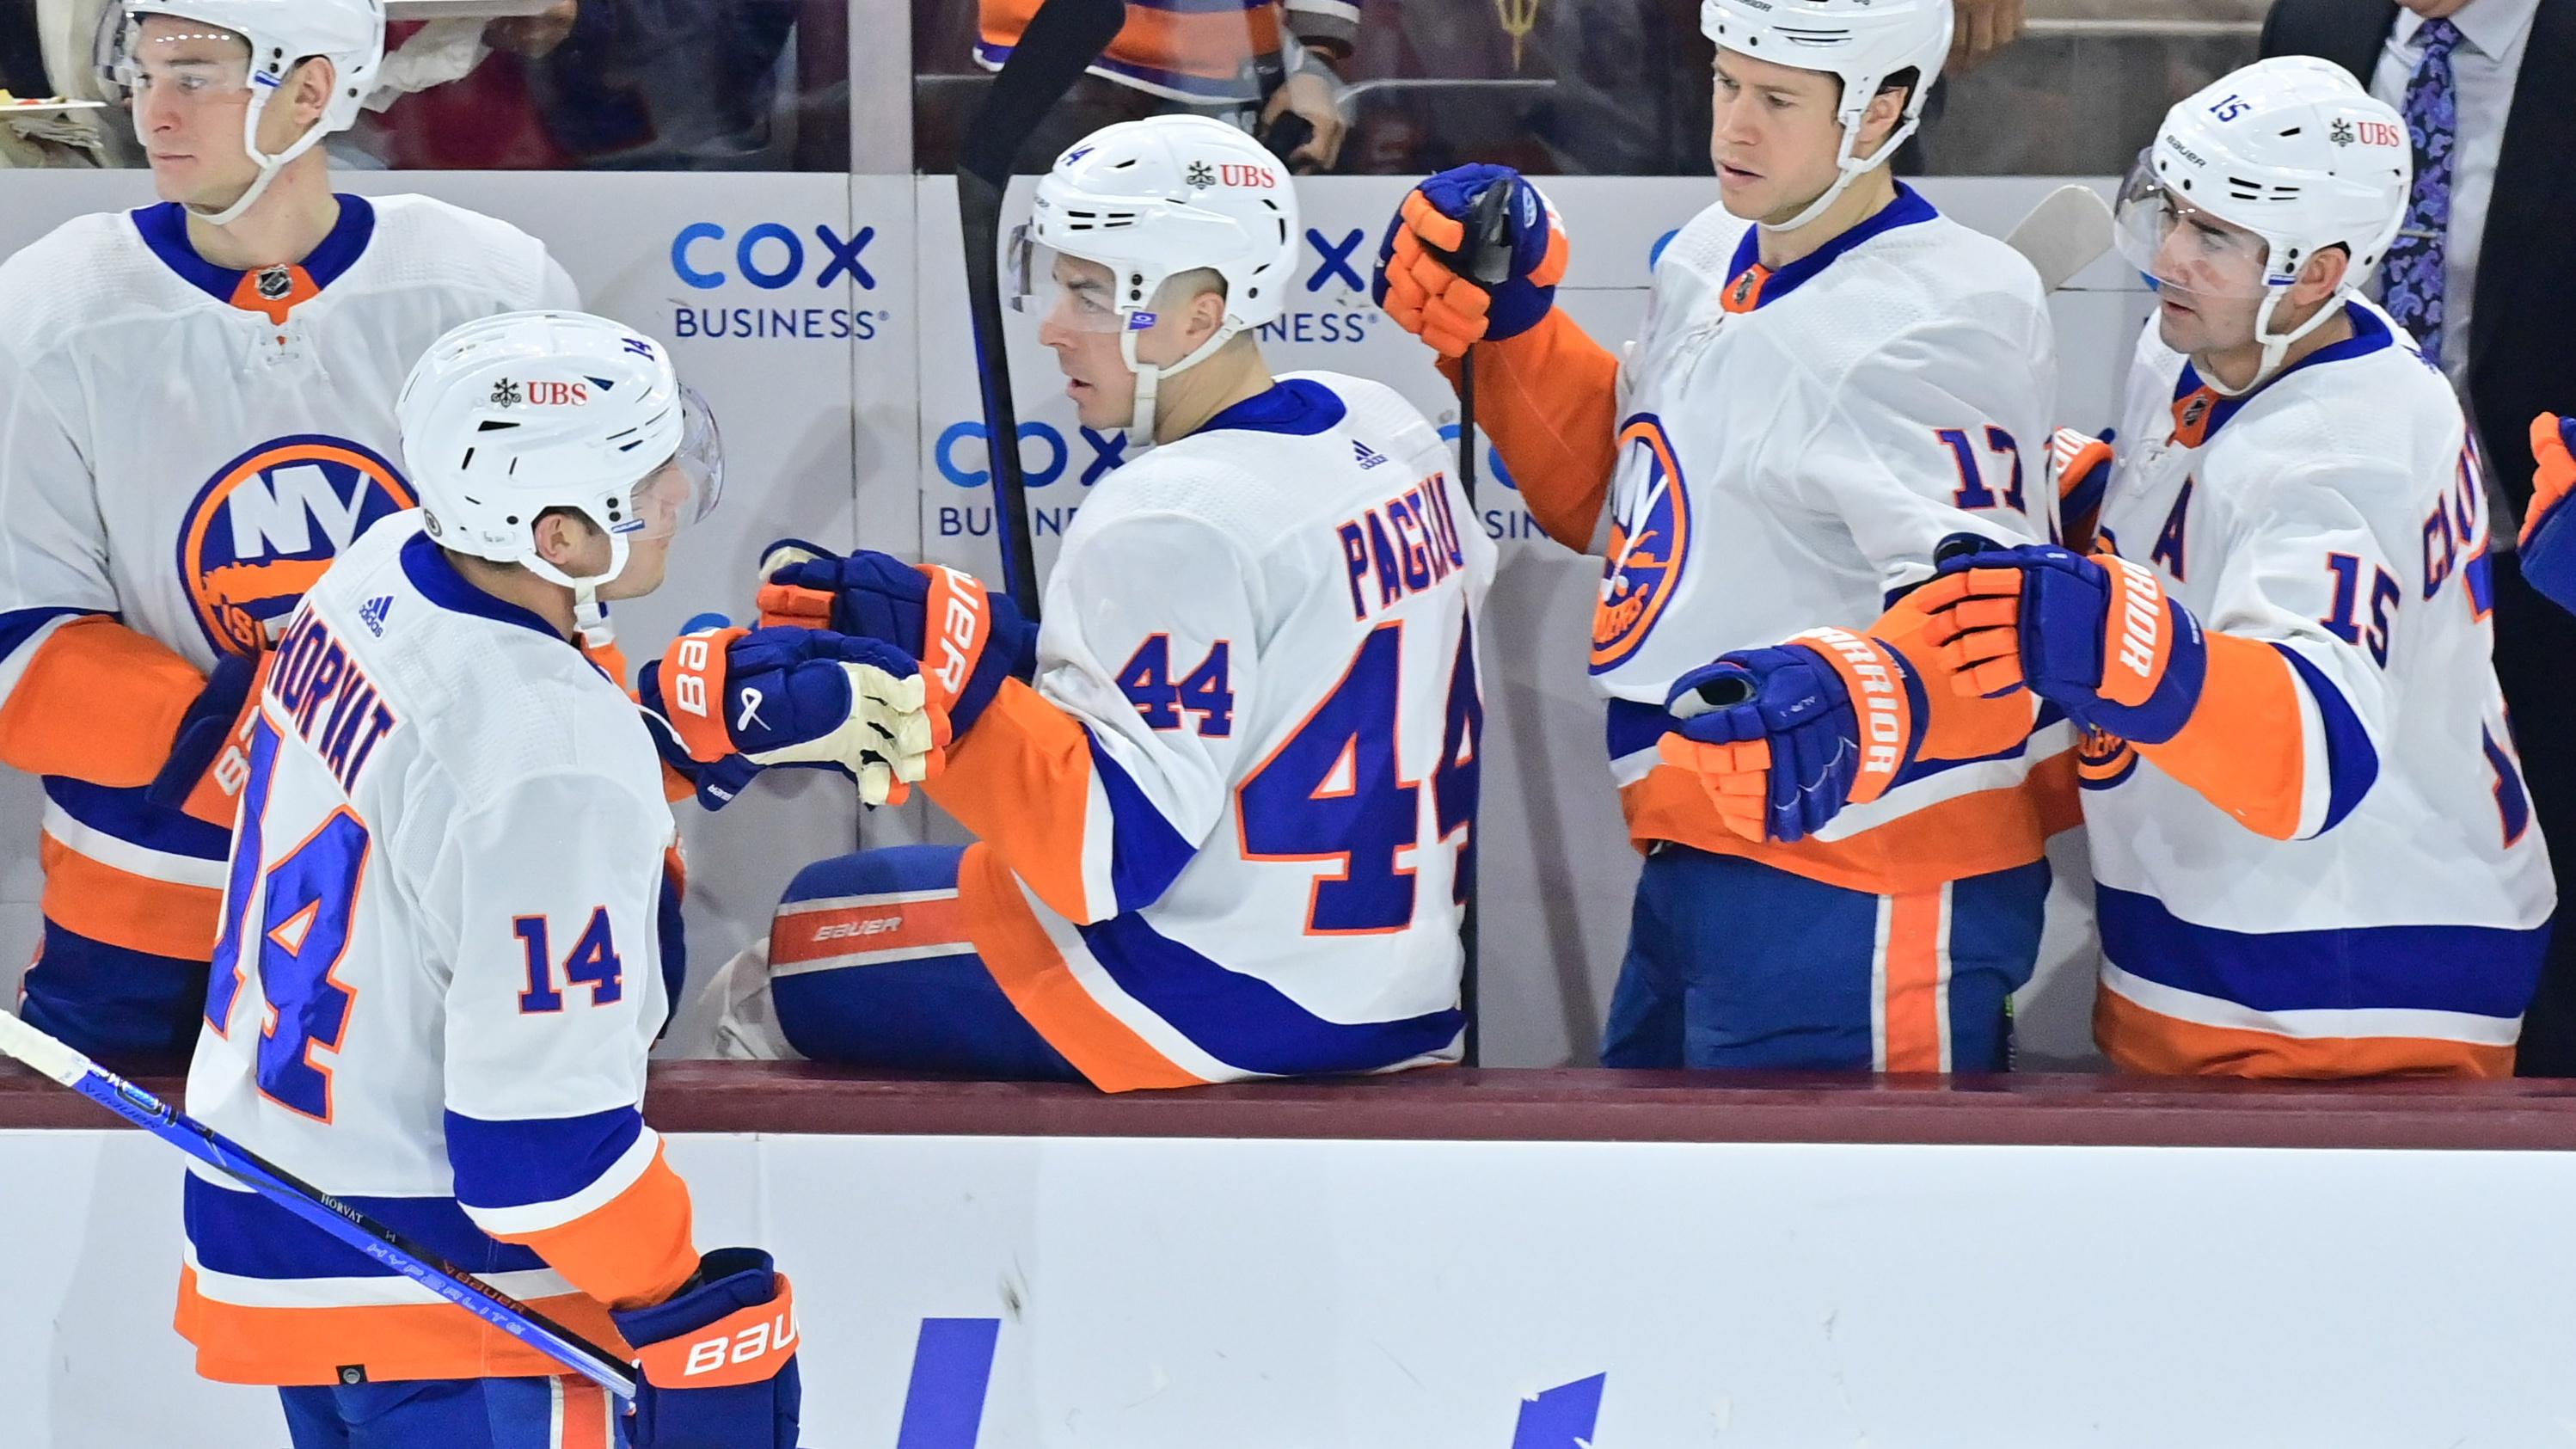 New York Islanders center Bo Horvat (14) celebrates with teammates after scoring a goal in the first period against the Arizona Coyotes at Mullett Arena / Matt Kartozian - USA TODAY Sports